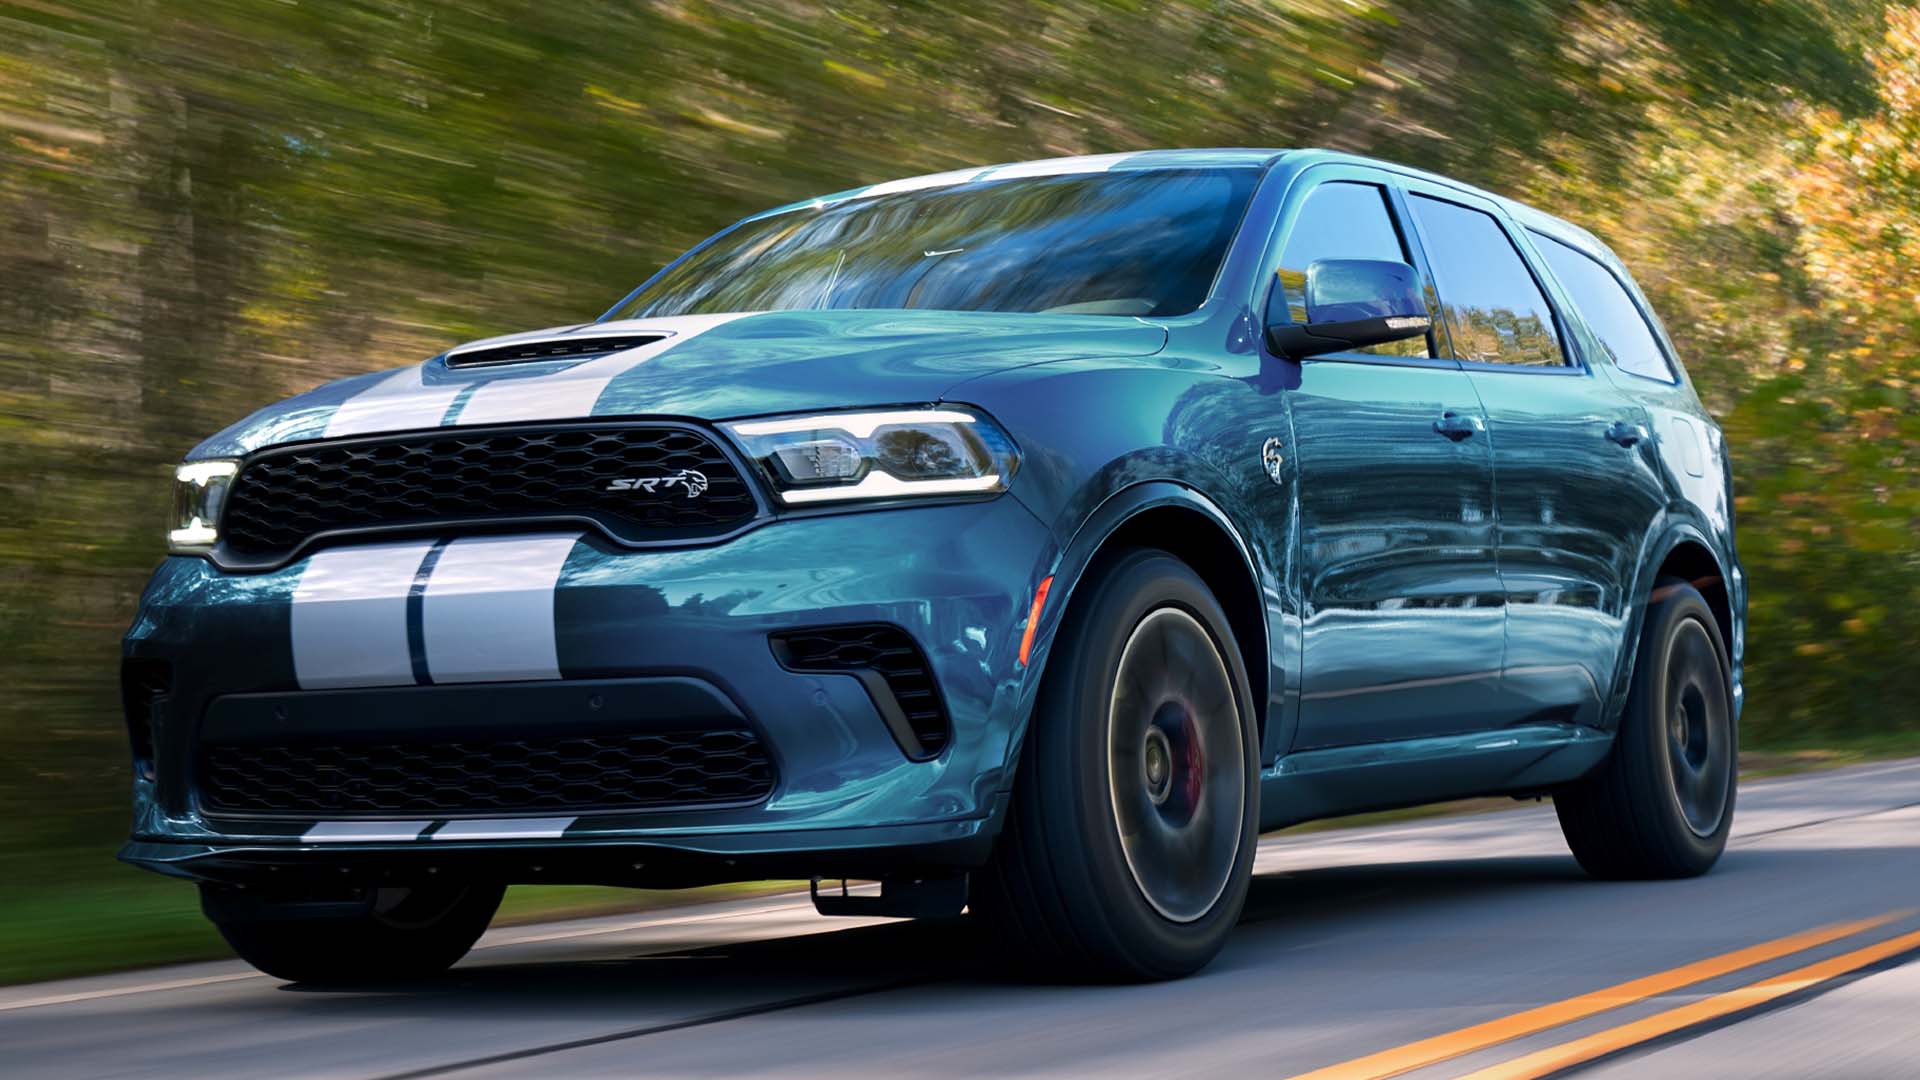 2023 Dodge Durango SRT Hellcat The 710HP SUV Is Back for One Last Ride